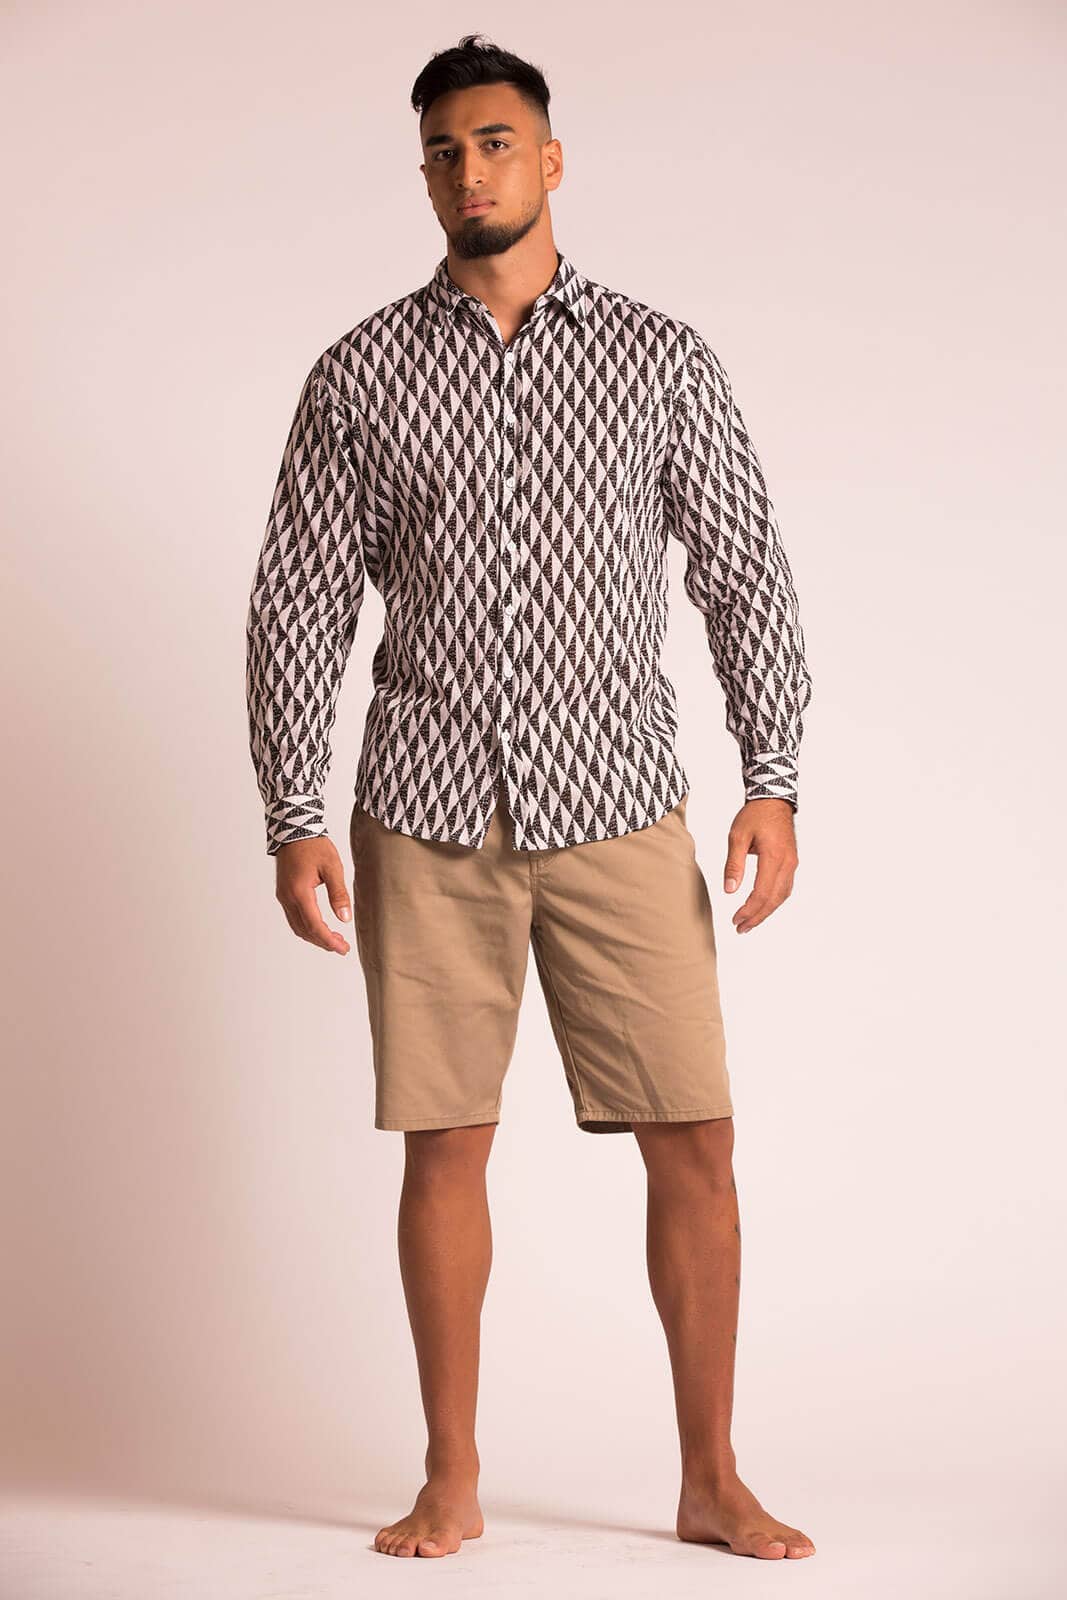 Male model wearing Hilo L-S in Mauna Pattern and Black and White Color - Front View